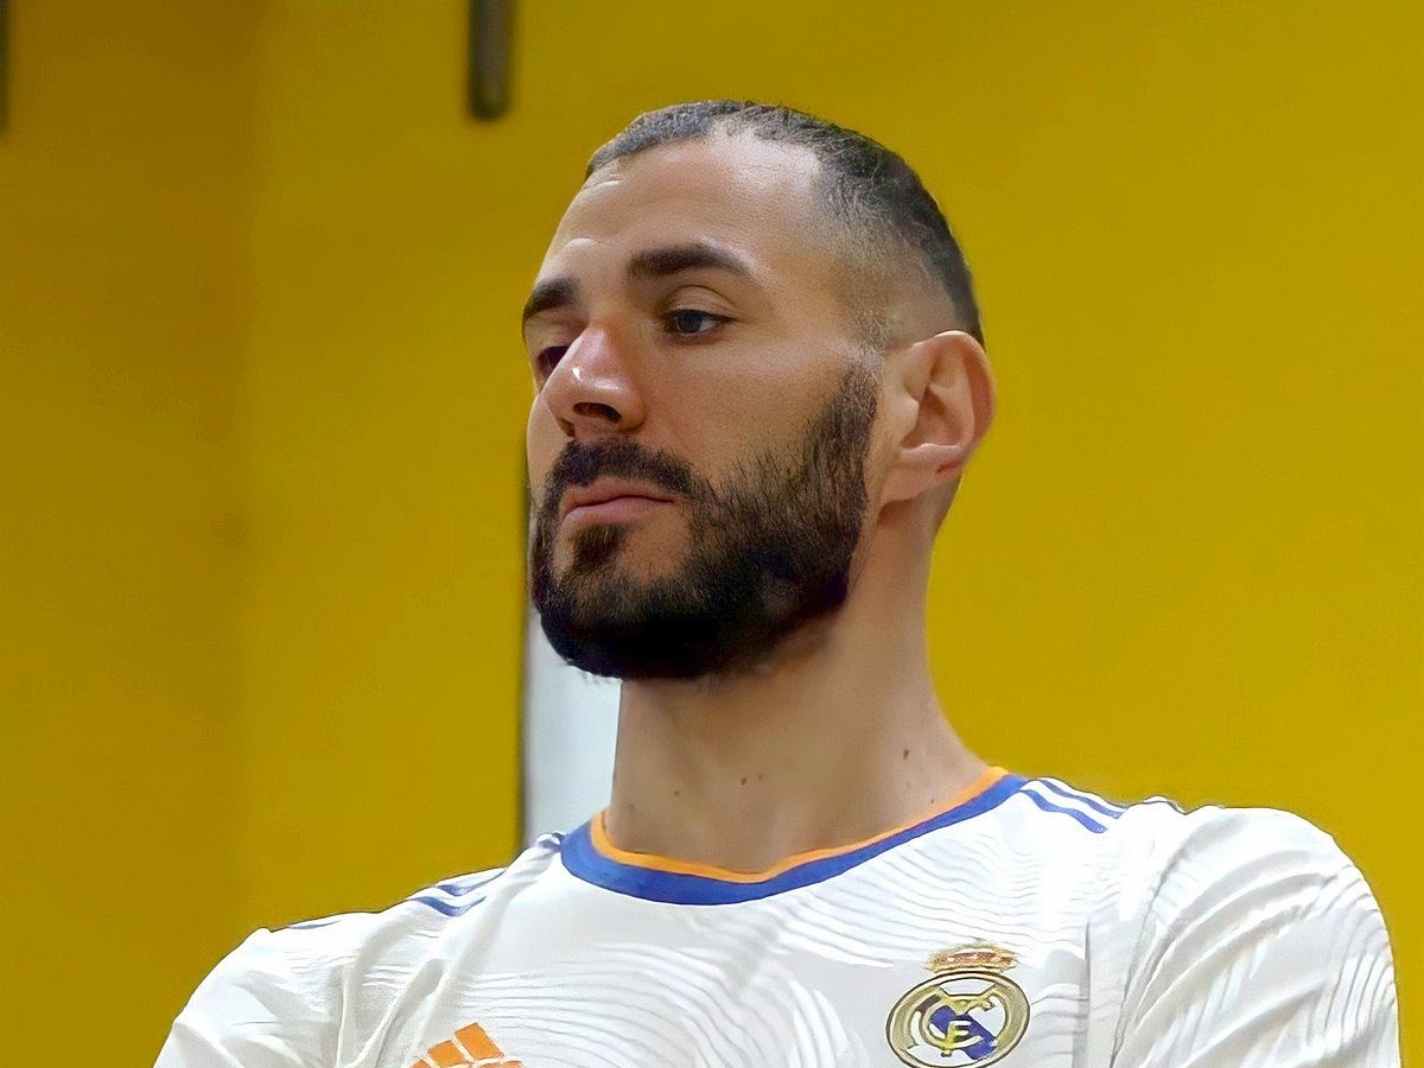 Karim Such is Karim Benzema's self-belief that he literally knew he was going to grab a hattrick against Chelsea